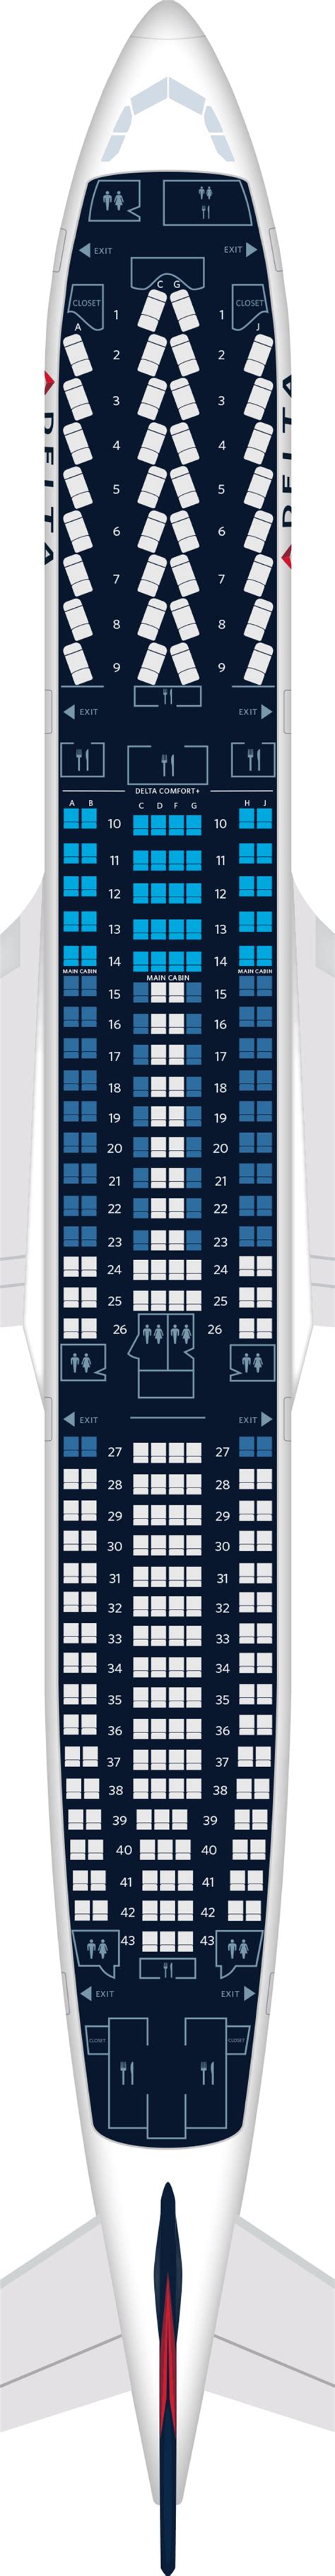 Airbus A330 Seating Chart United Airlines Bios Pics